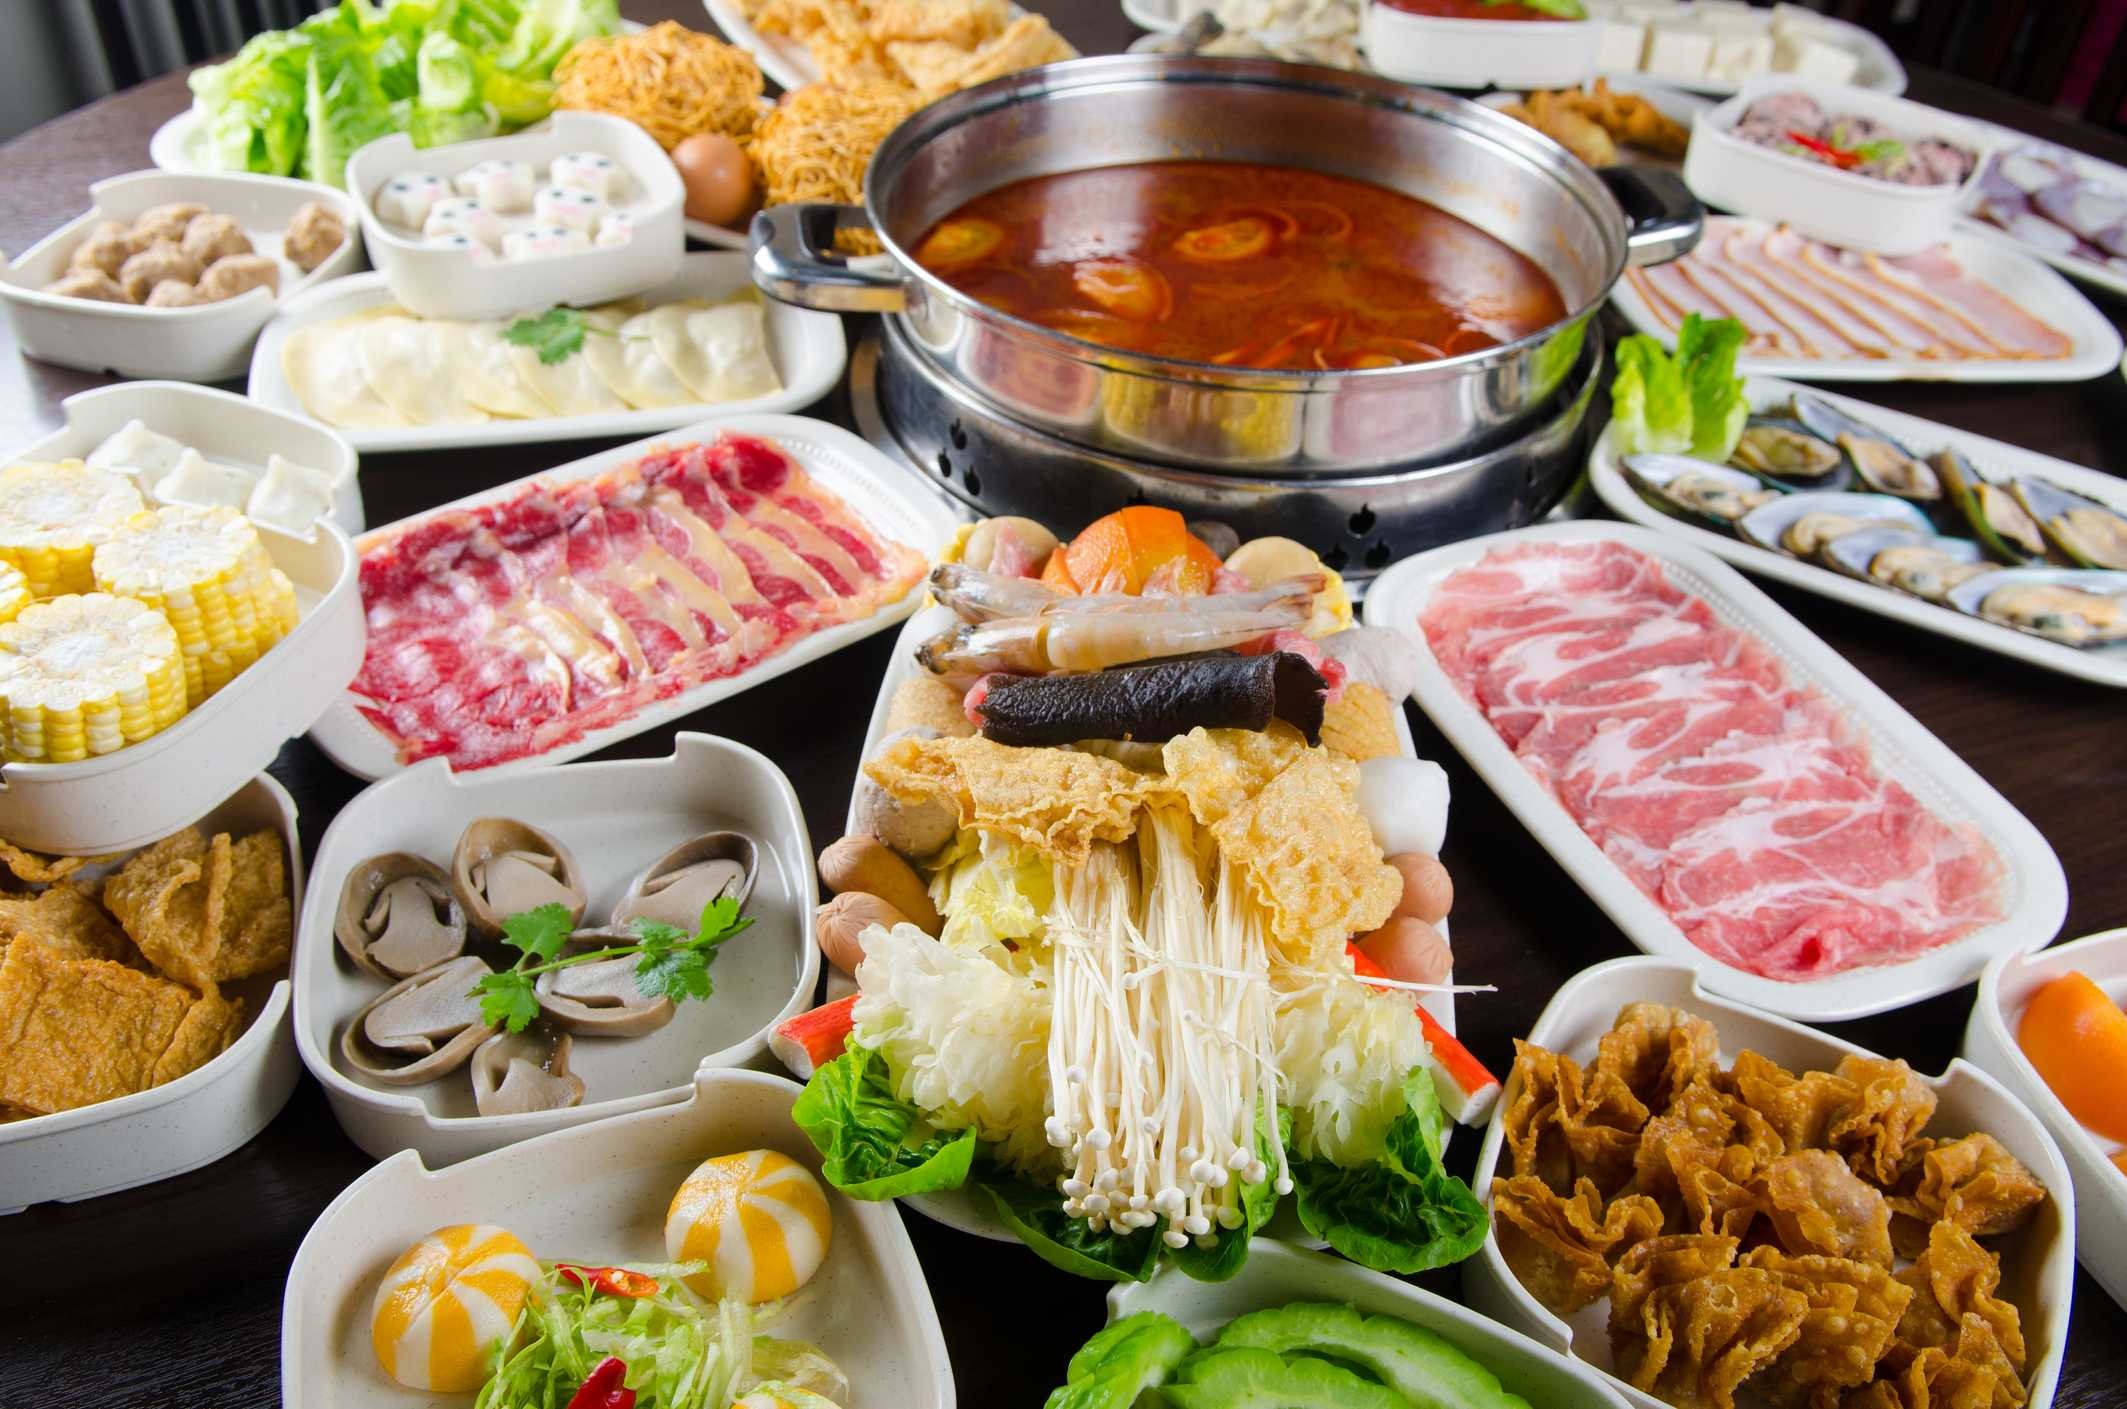 A shabu-shabu hotpot meal. Swapping out healthier alternatives can make the meal better for your health. Photo: Getty Images